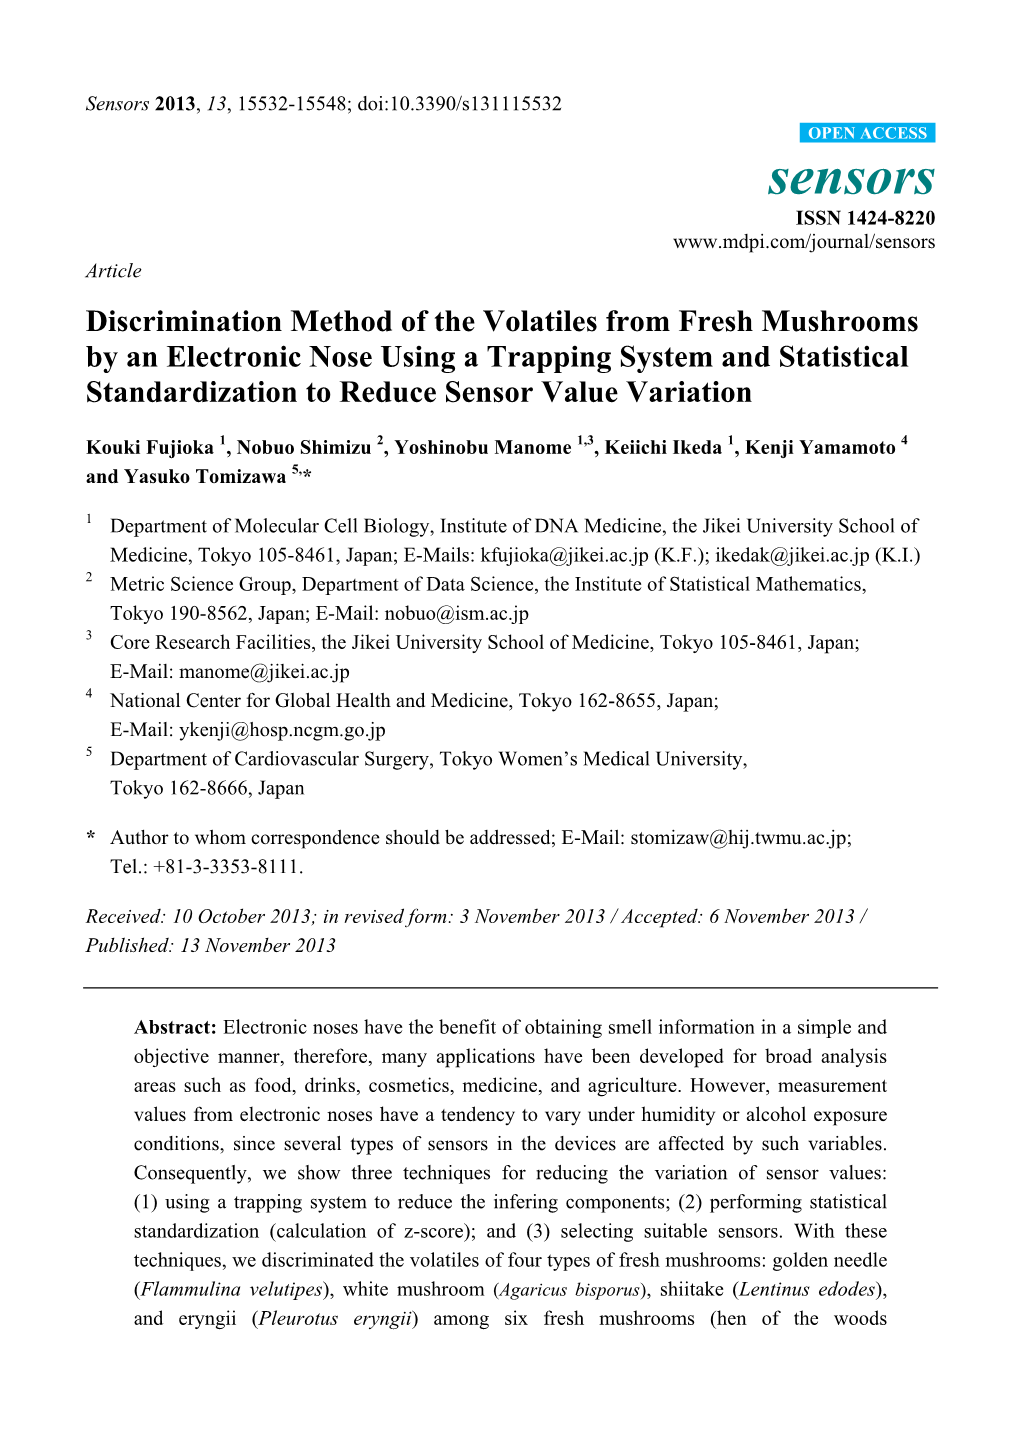 Discrimination Method of the Volatiles from Fresh Mushrooms by An